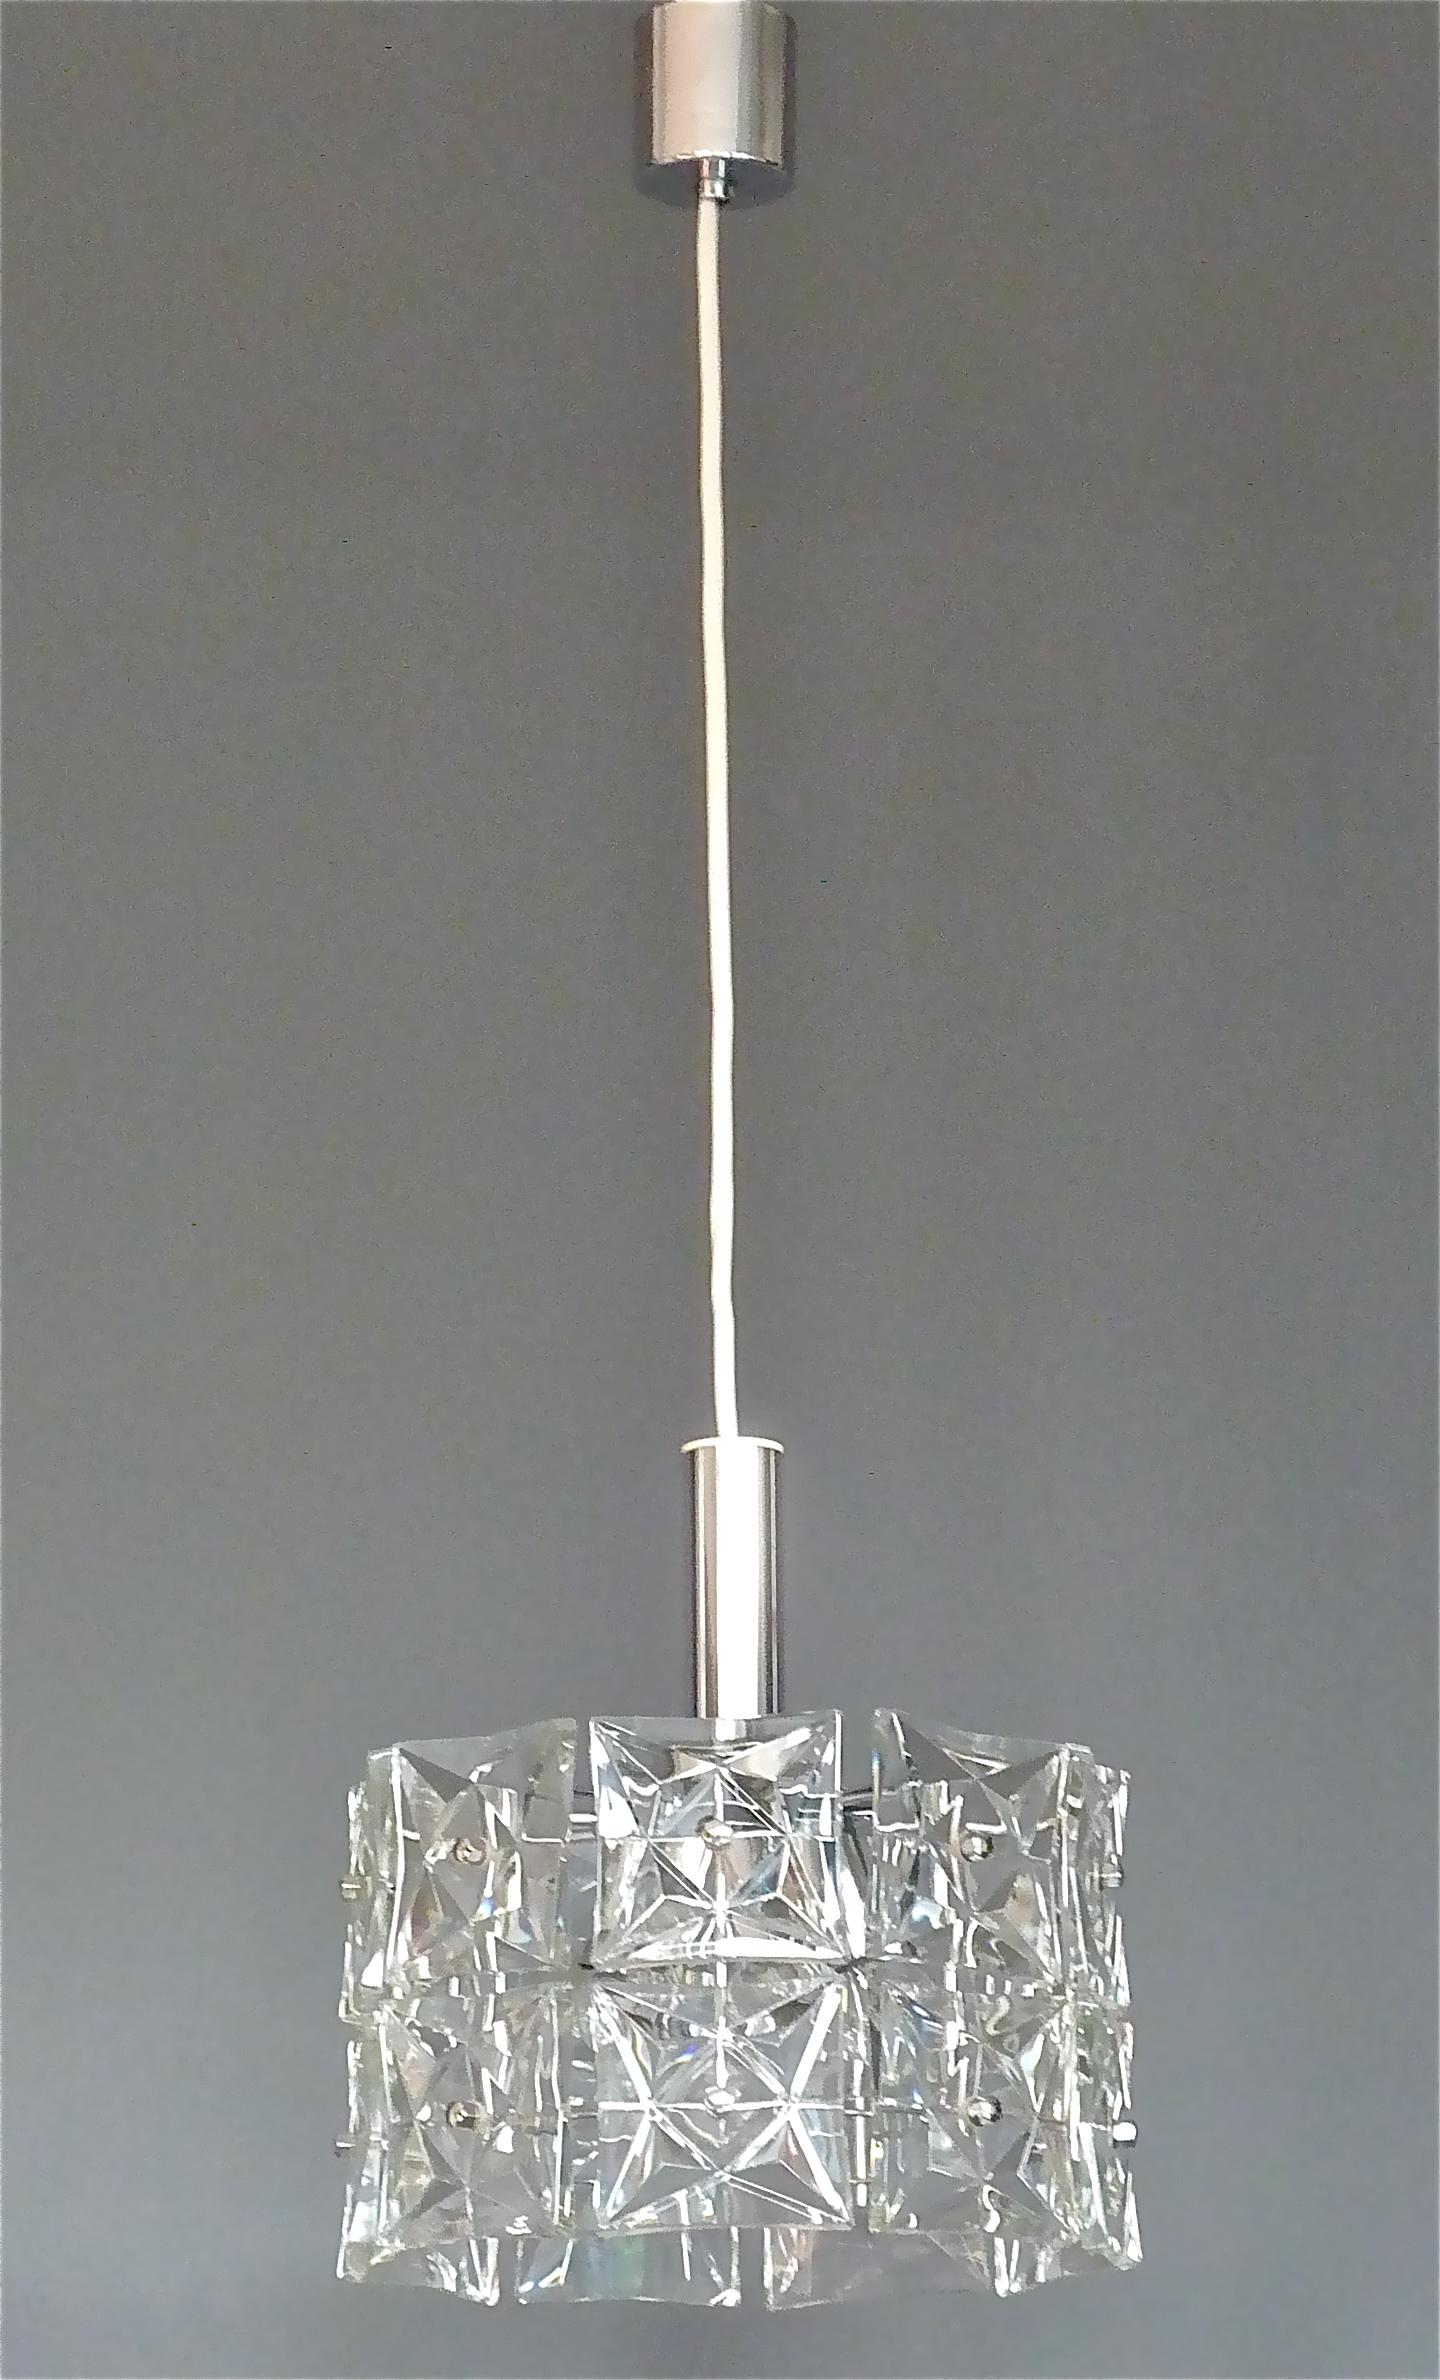 Modernist Space Age two tier chandelier by Kinkeldey, Germany, circa 1960-1970. It has 18 sparkling square faceted crystal glass panels, each 10 x 10 cm / 3.94 x 3.94 inches tall and wide mounted on a chrome brass metal fixture. It takes six E14